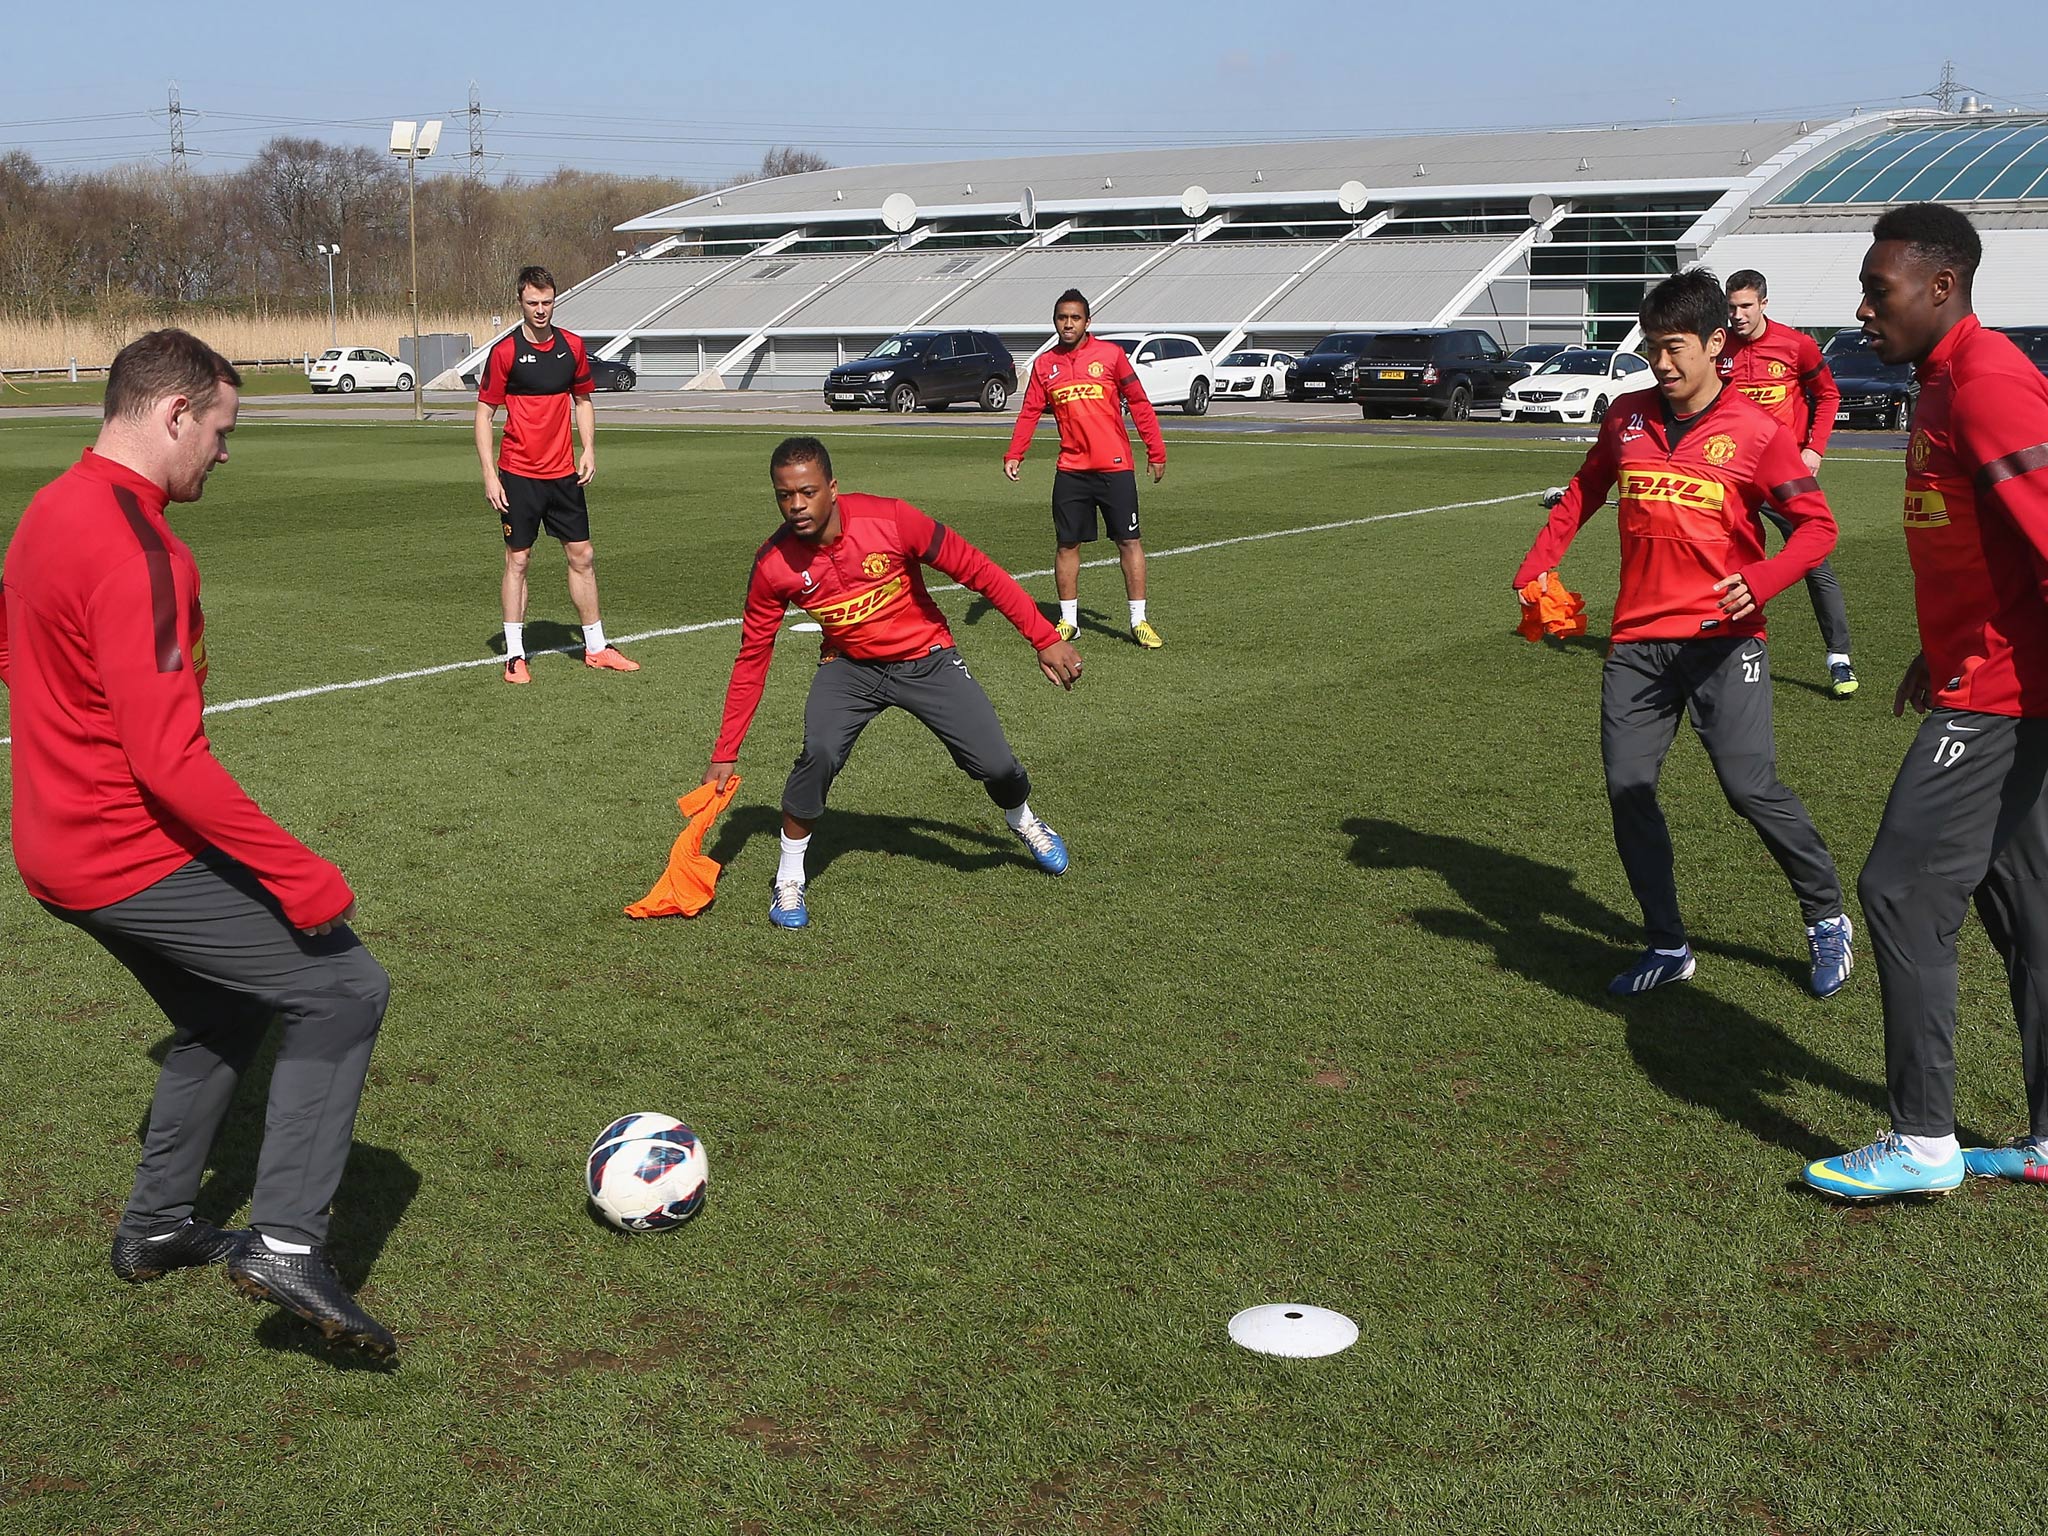 Wayne Rooney, Michael Carrick, Patrice Evra, Anderson, Shinji Kagawa, Robin van Persie and Danny Welbeck in a training exercise for Manchester United